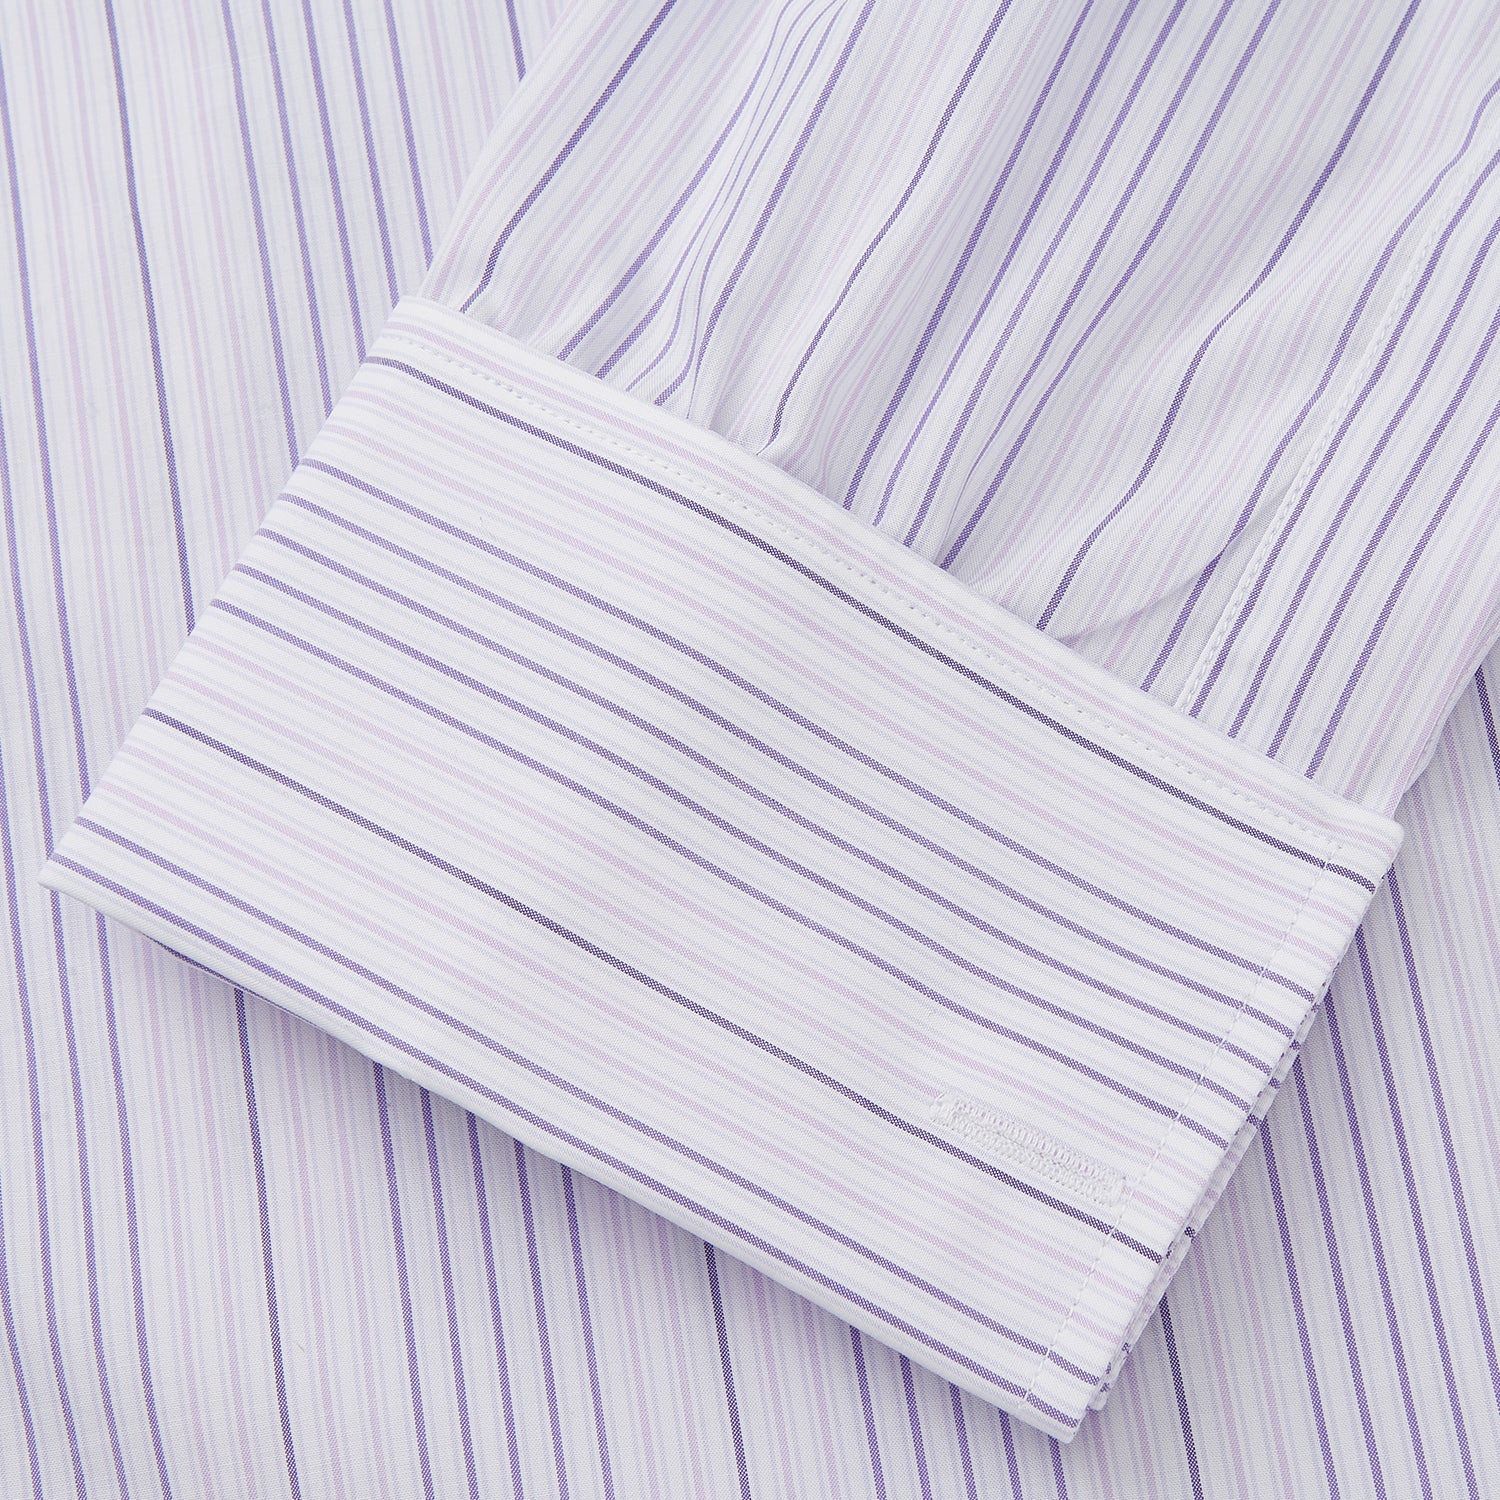 Purple And White Stripe Twill Cotton Regular Fit Shirt with T&A Collar And Double Cuffs